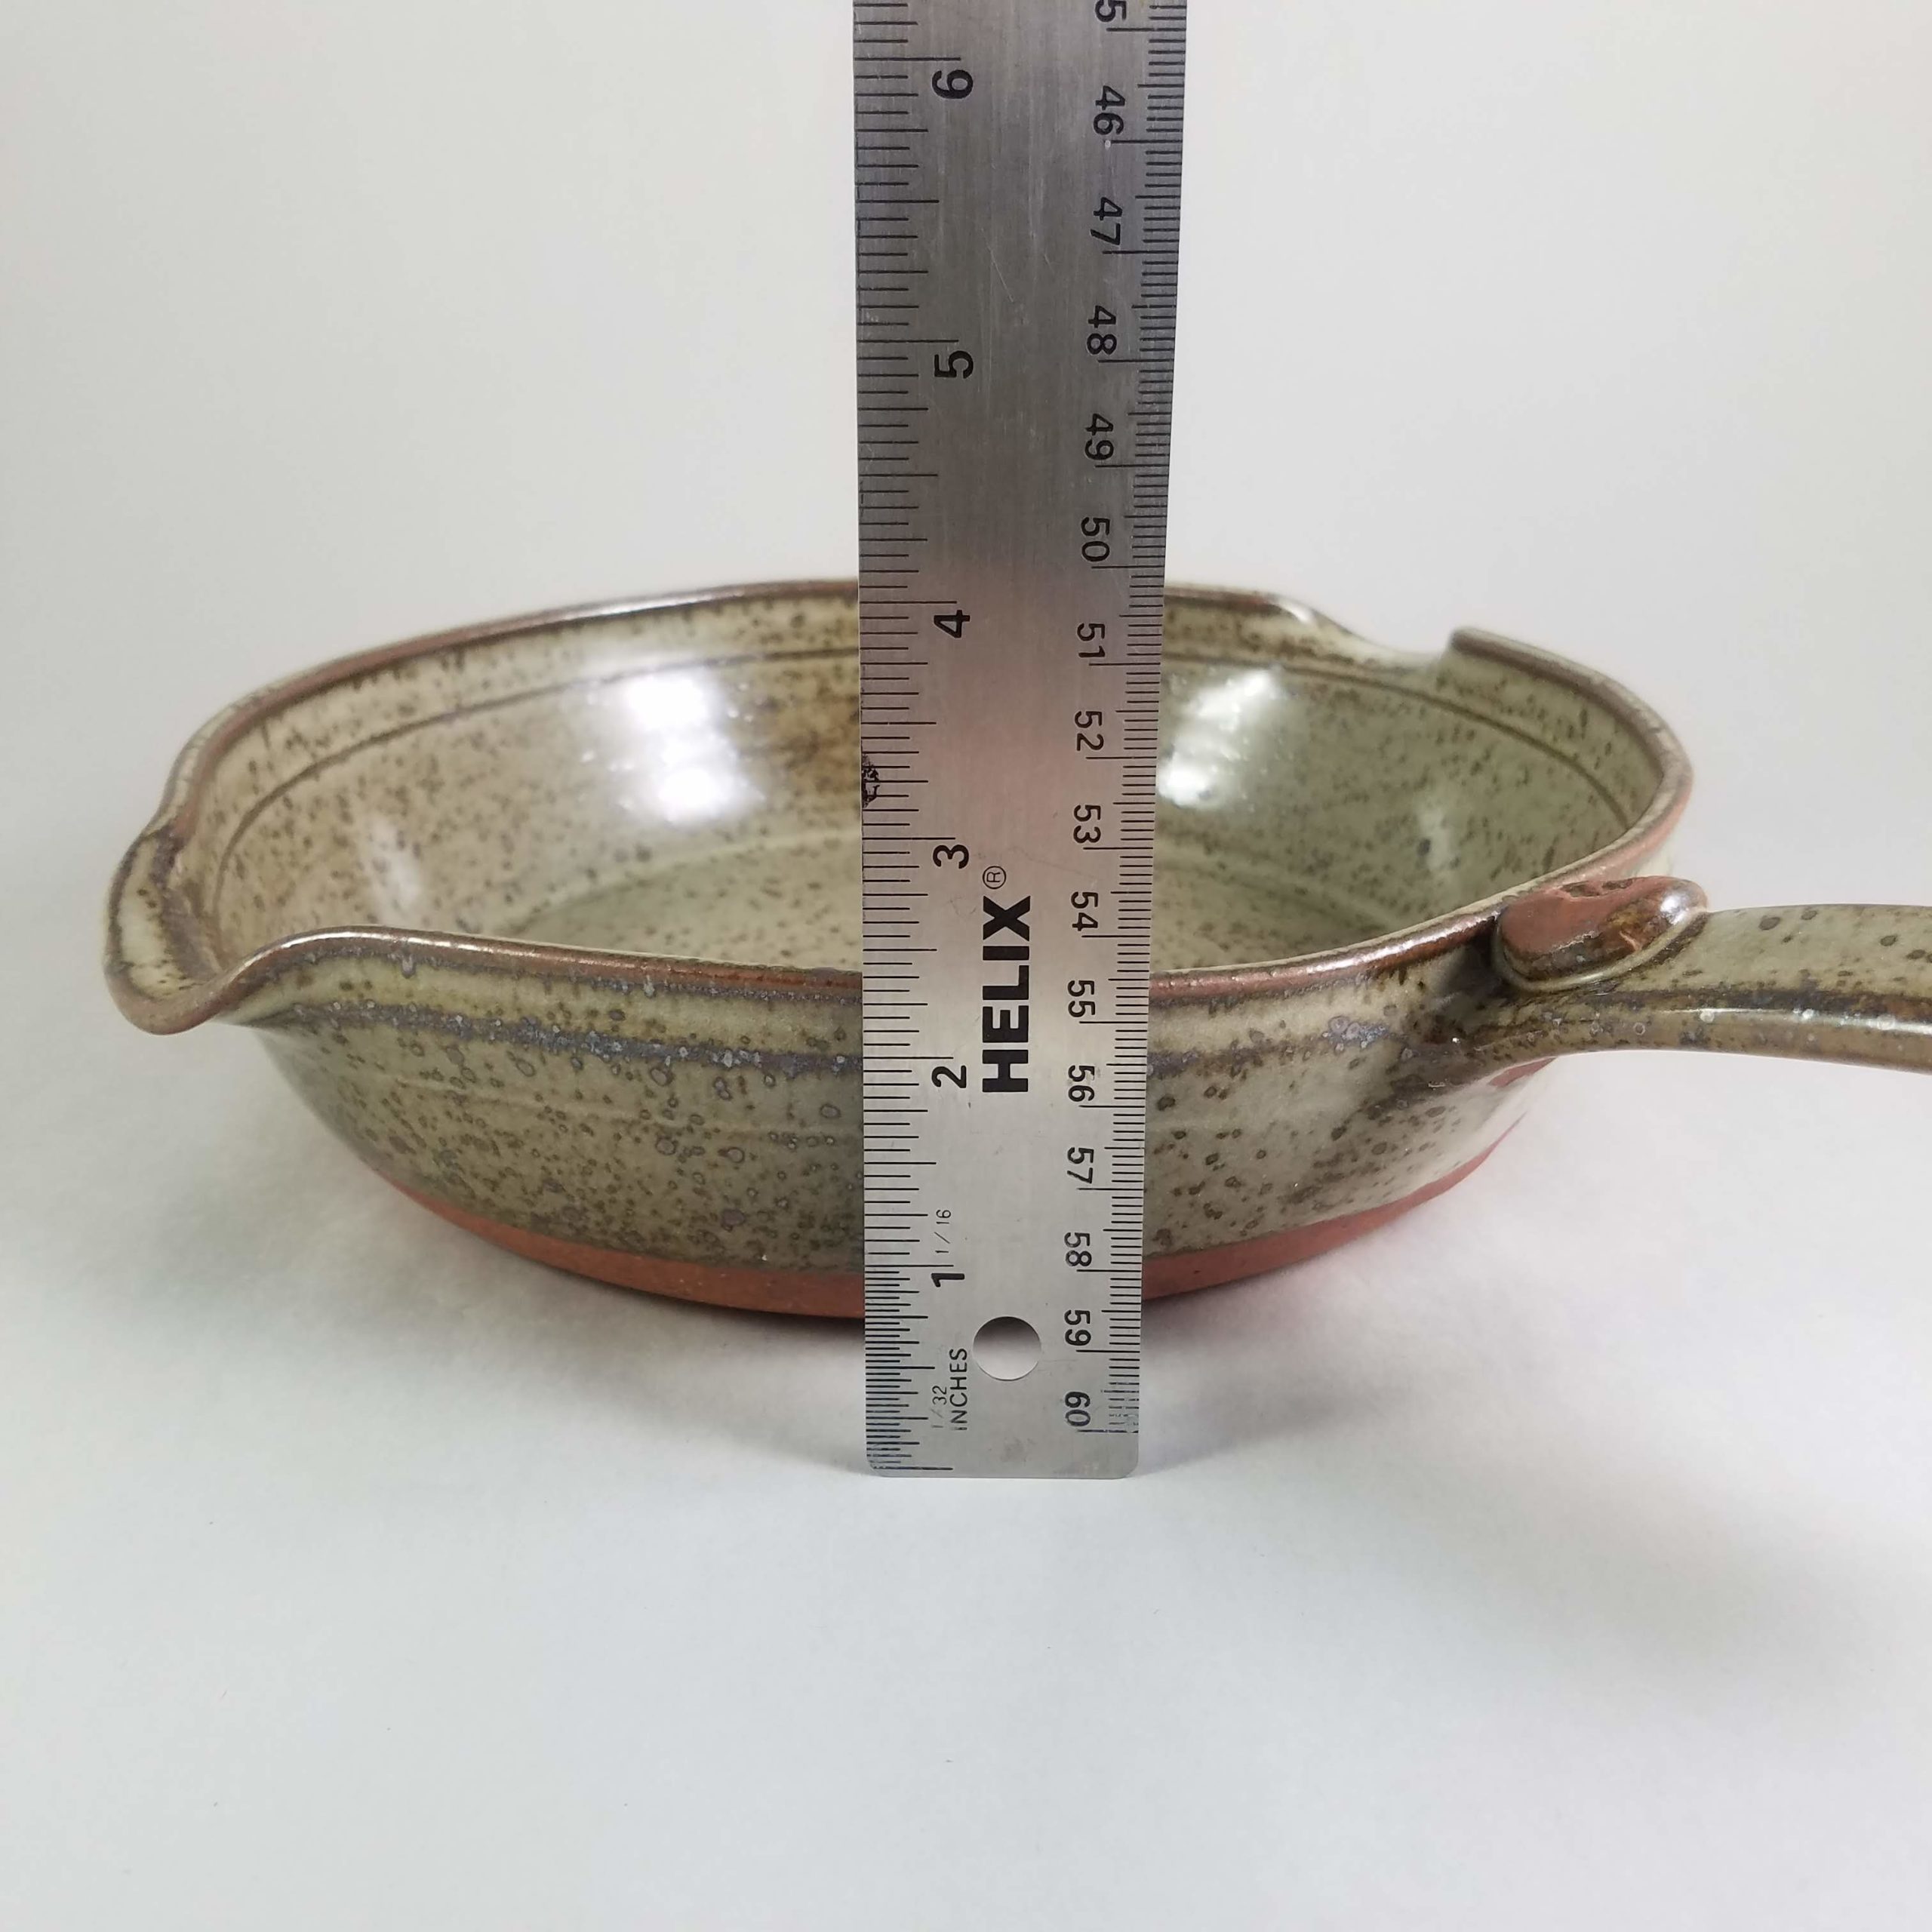 Clay Coyote Small Skillet with Flameware clay for universal cooking